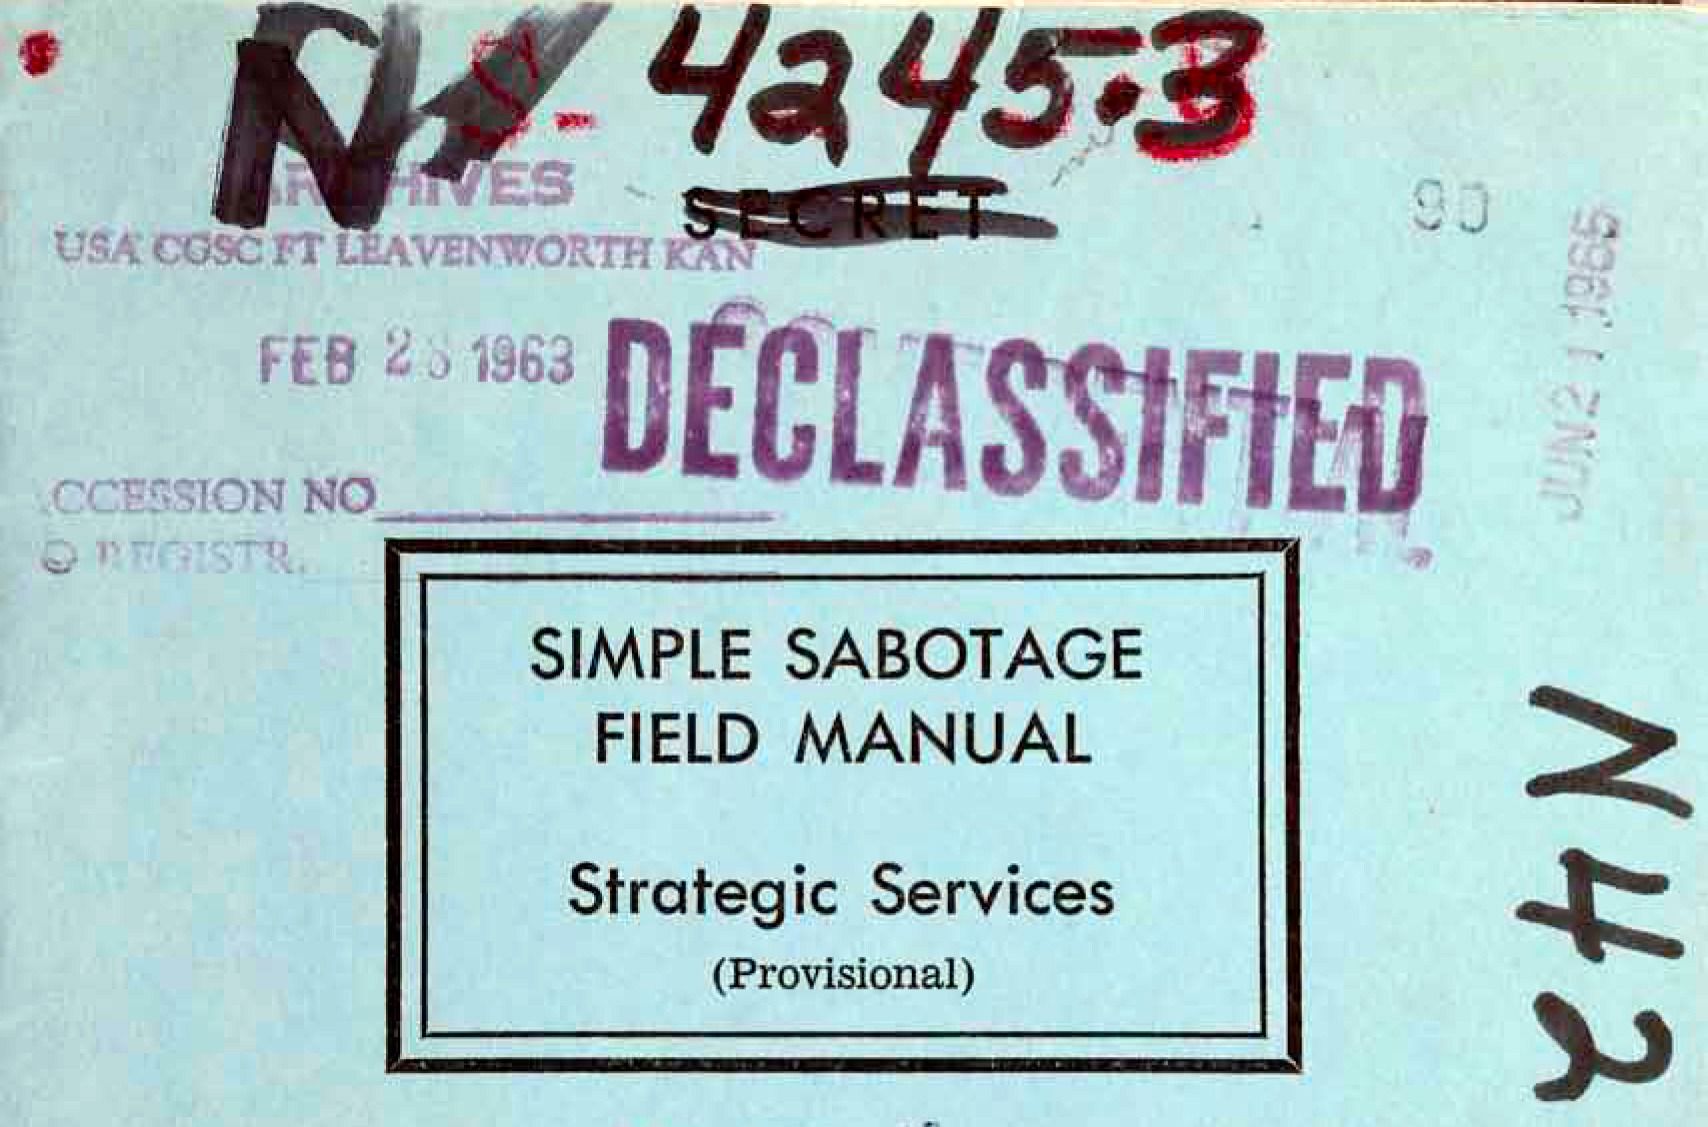 Learning from the OSS: Destroy Your Organization by Following the Simple Sabotage Field Manual